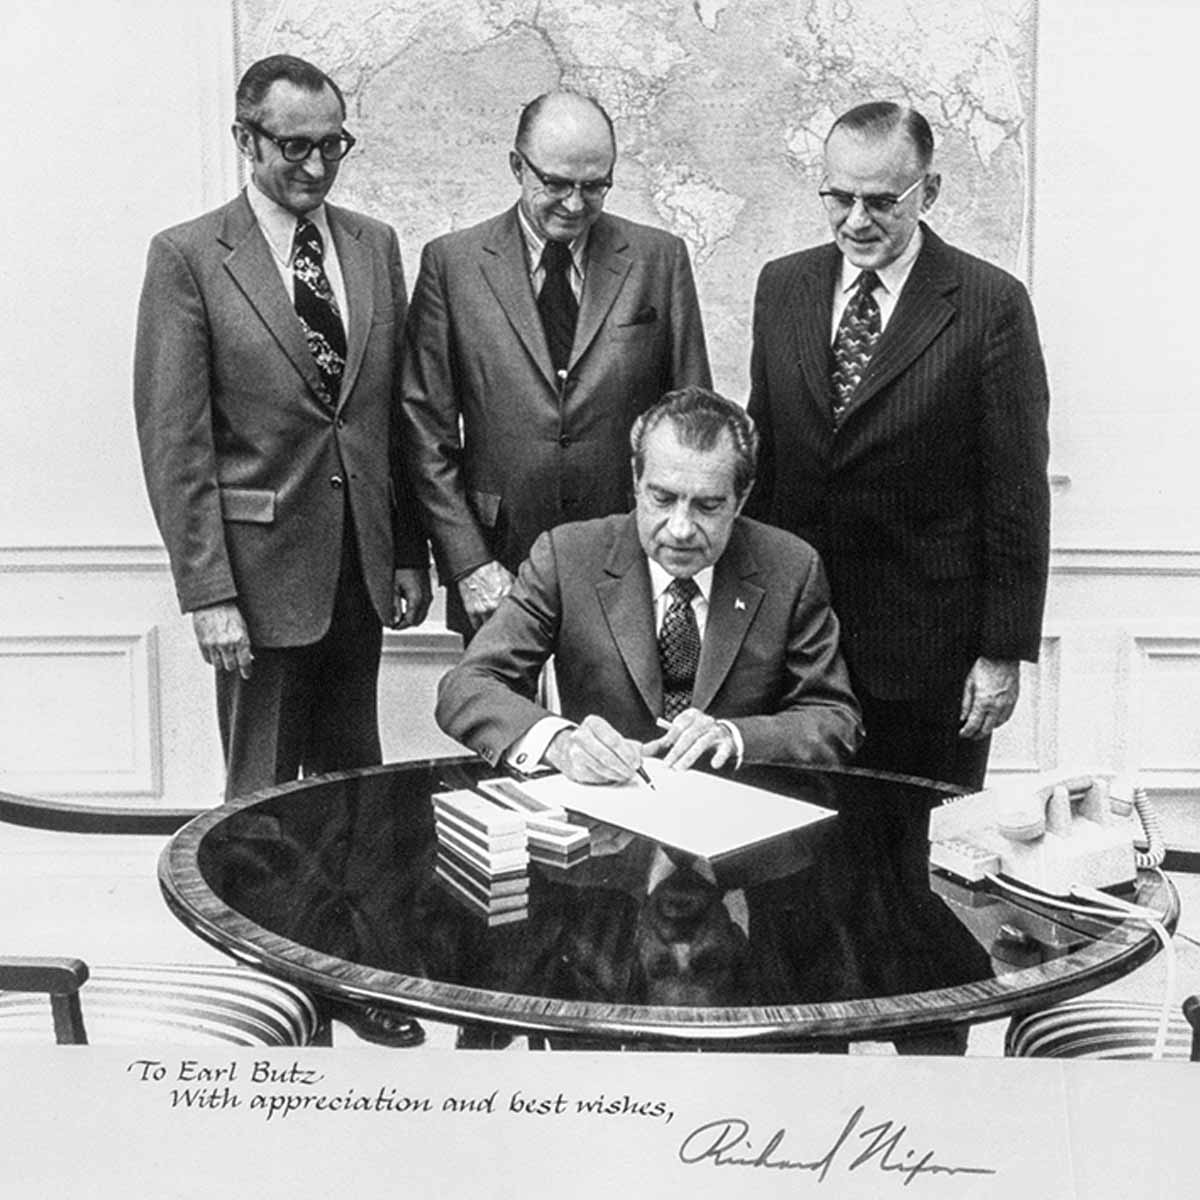 President Nixon signing the Rural Development Act in 1972.